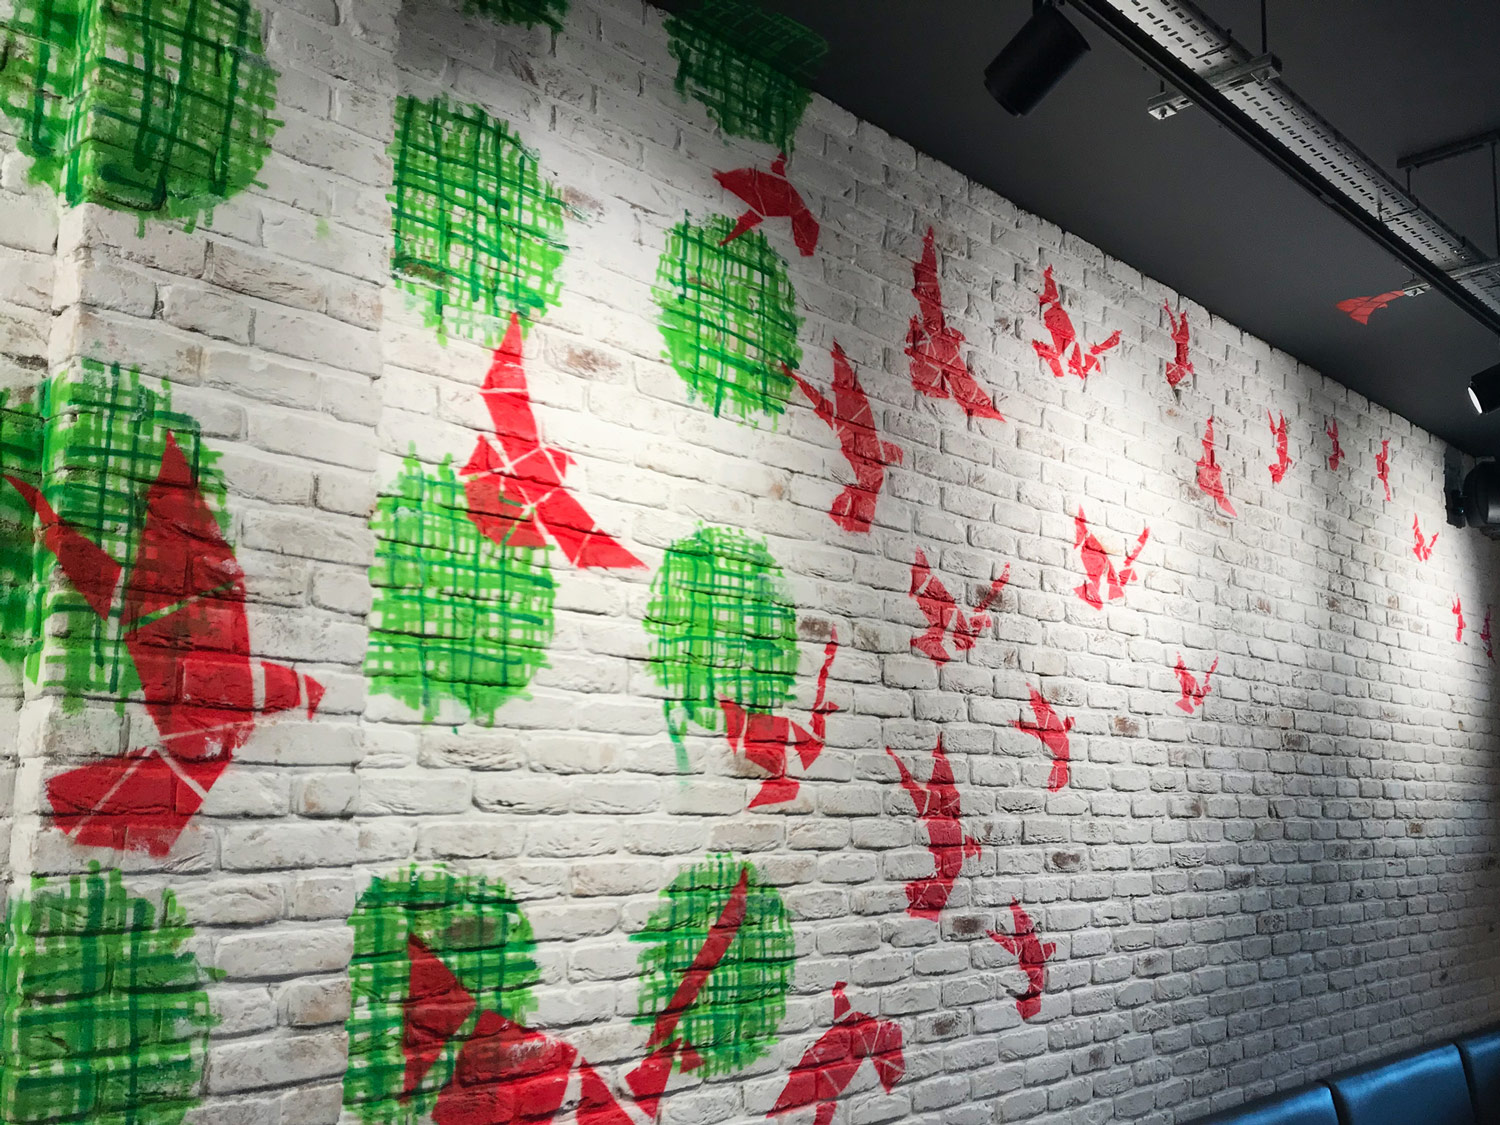 red birds and green circles on a white brick background